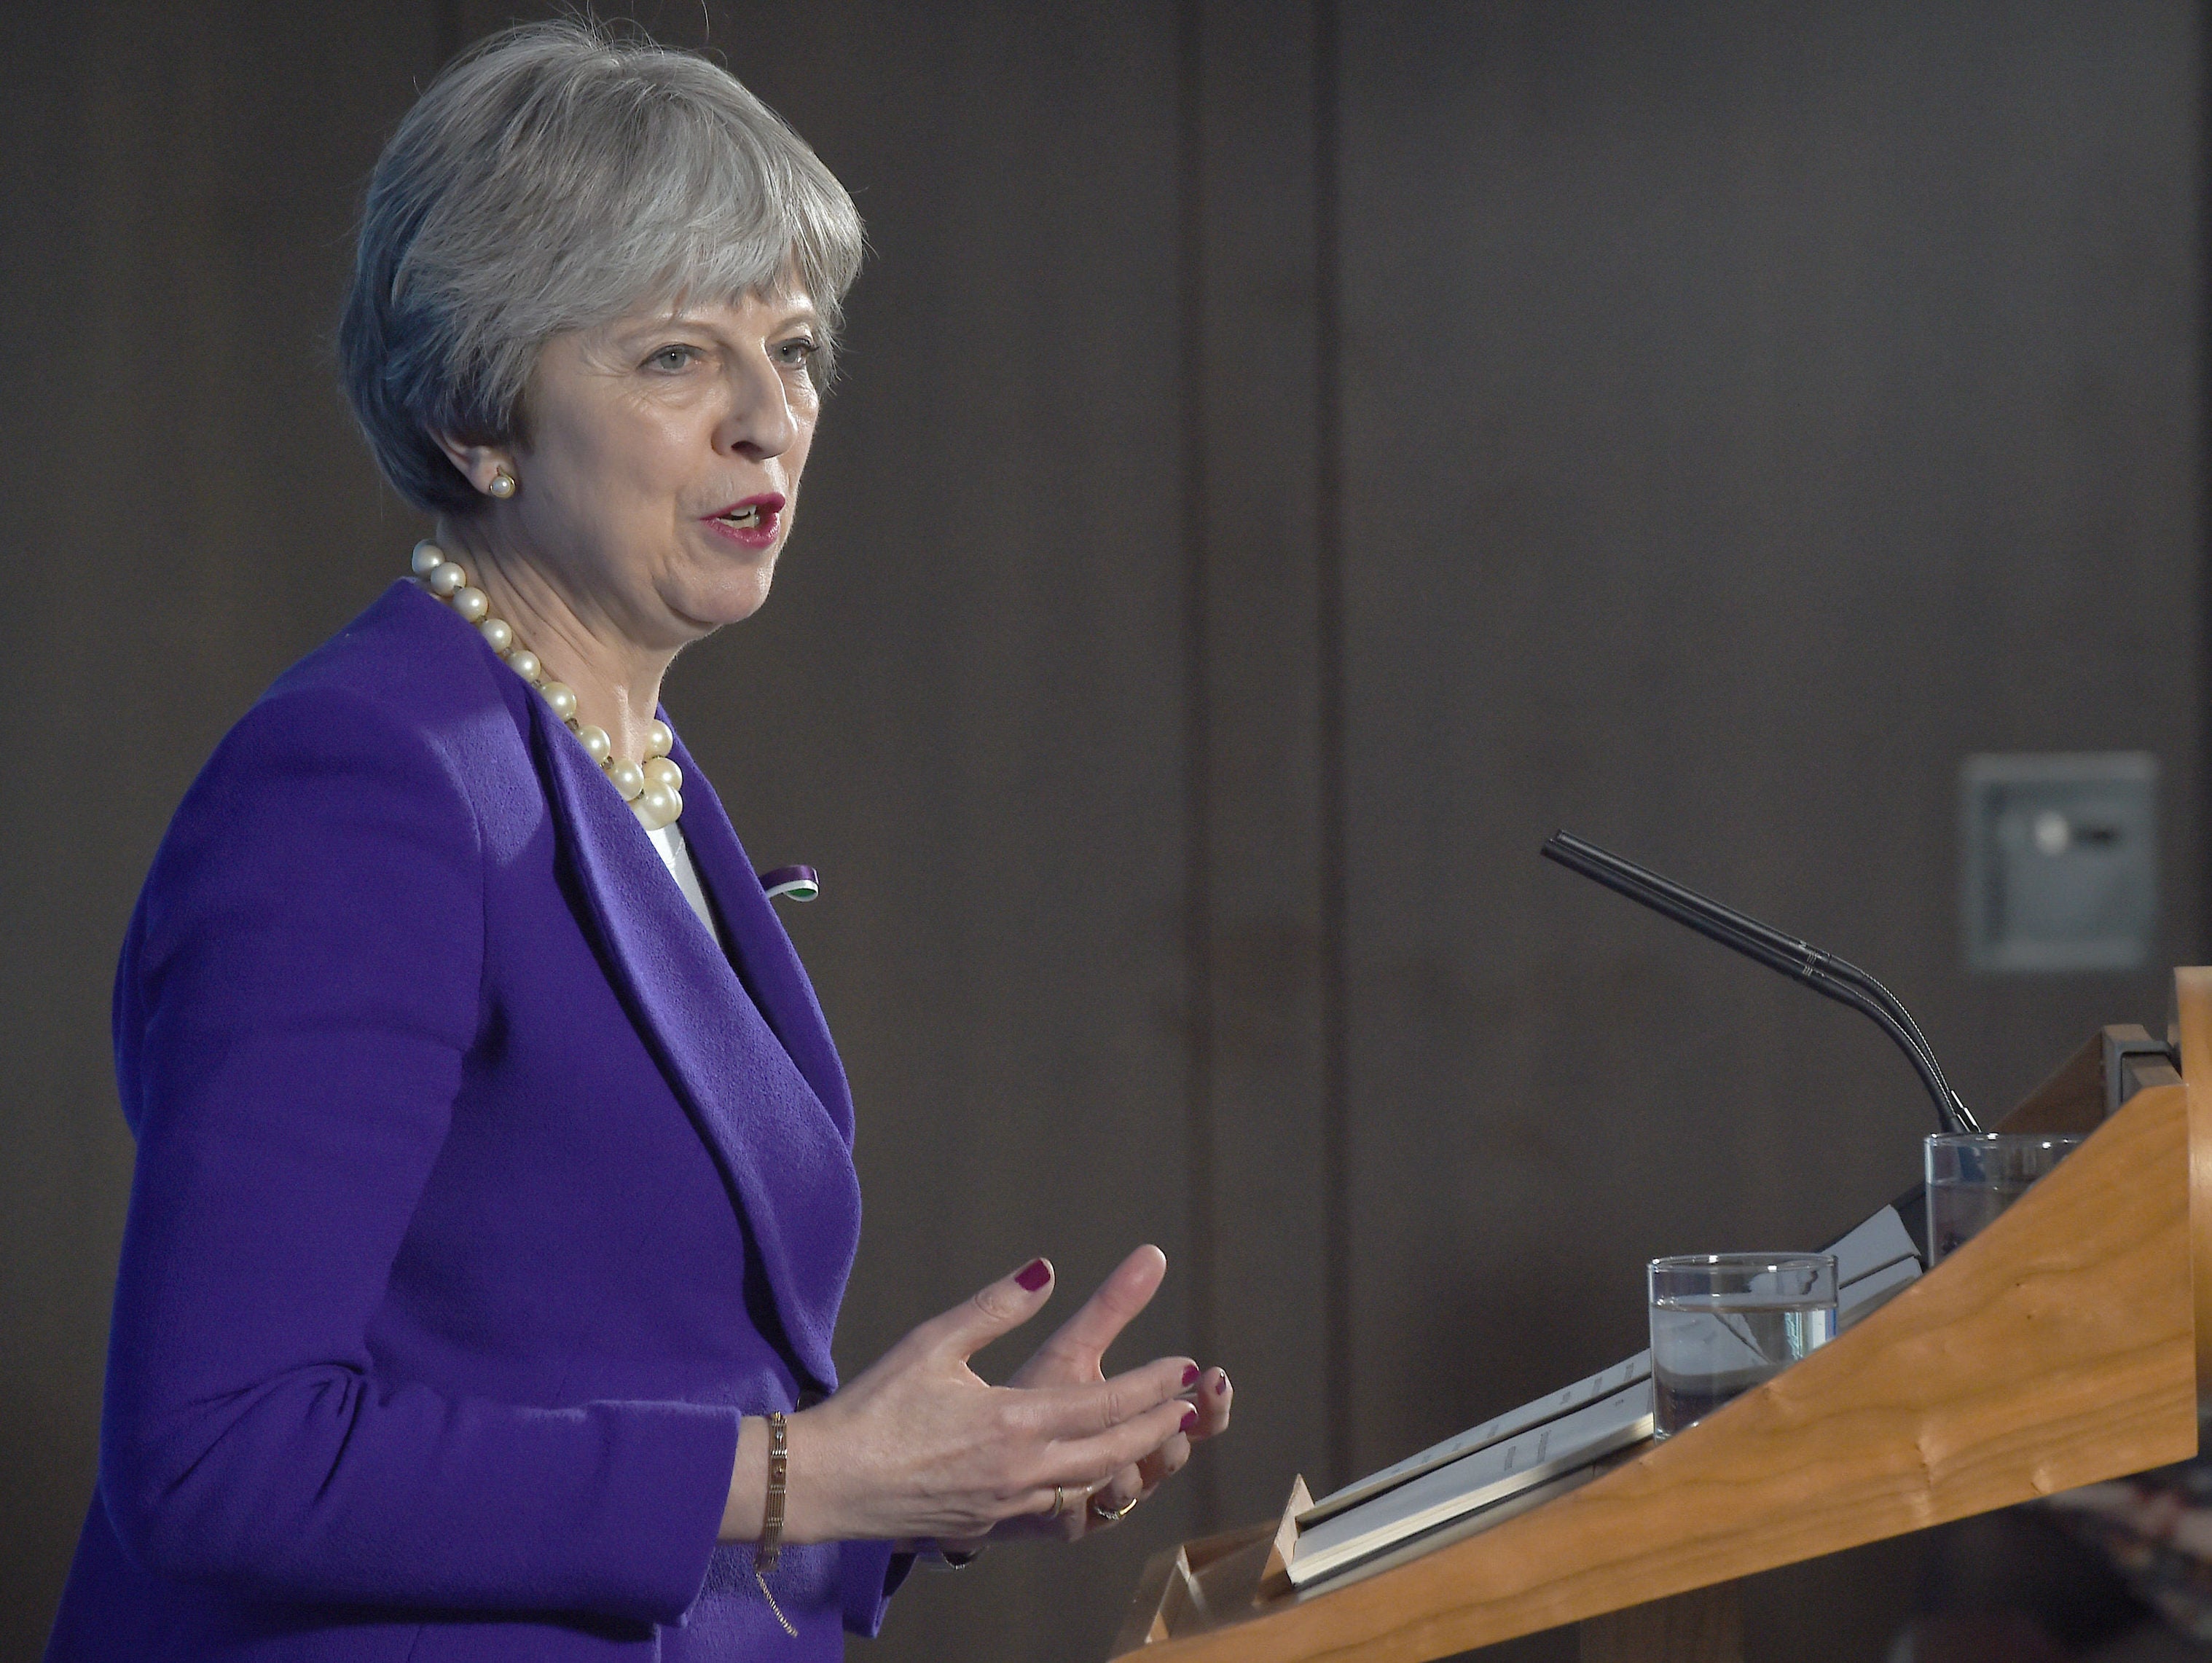 Theresa May pokes fun at Standard editor Osborne and lauds political journalists at Westminster Correspondents’ Dinner